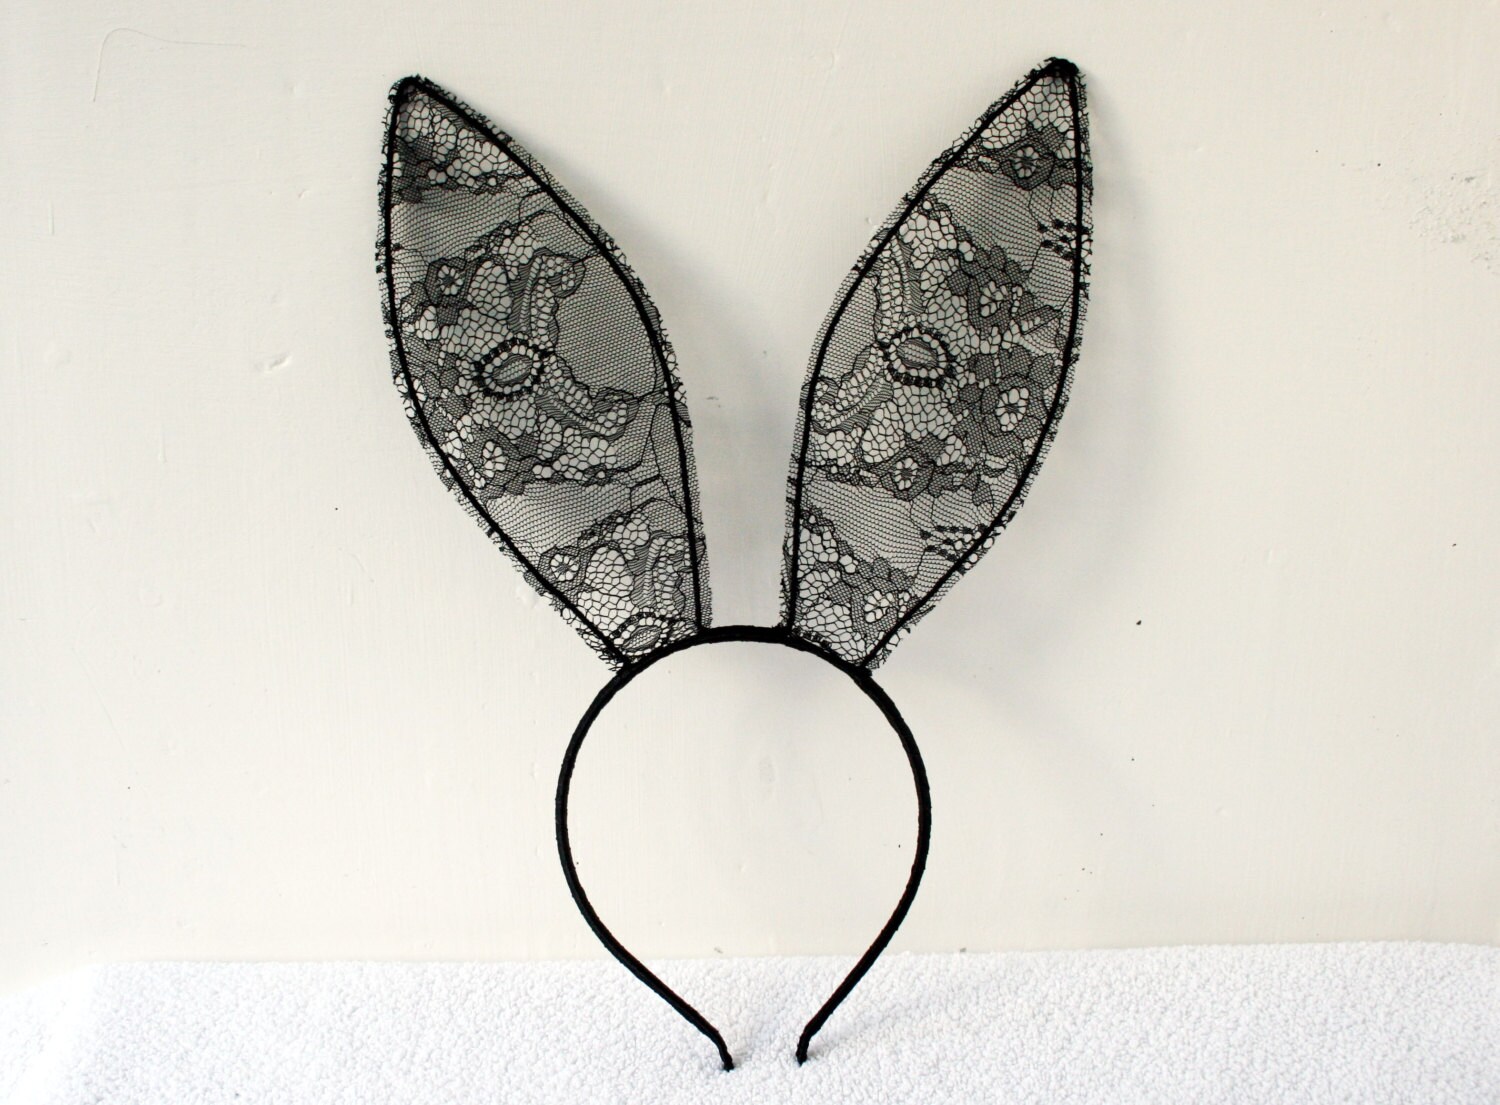 Black Lace Bunny Ears 20 Cm Headband Made to Order 